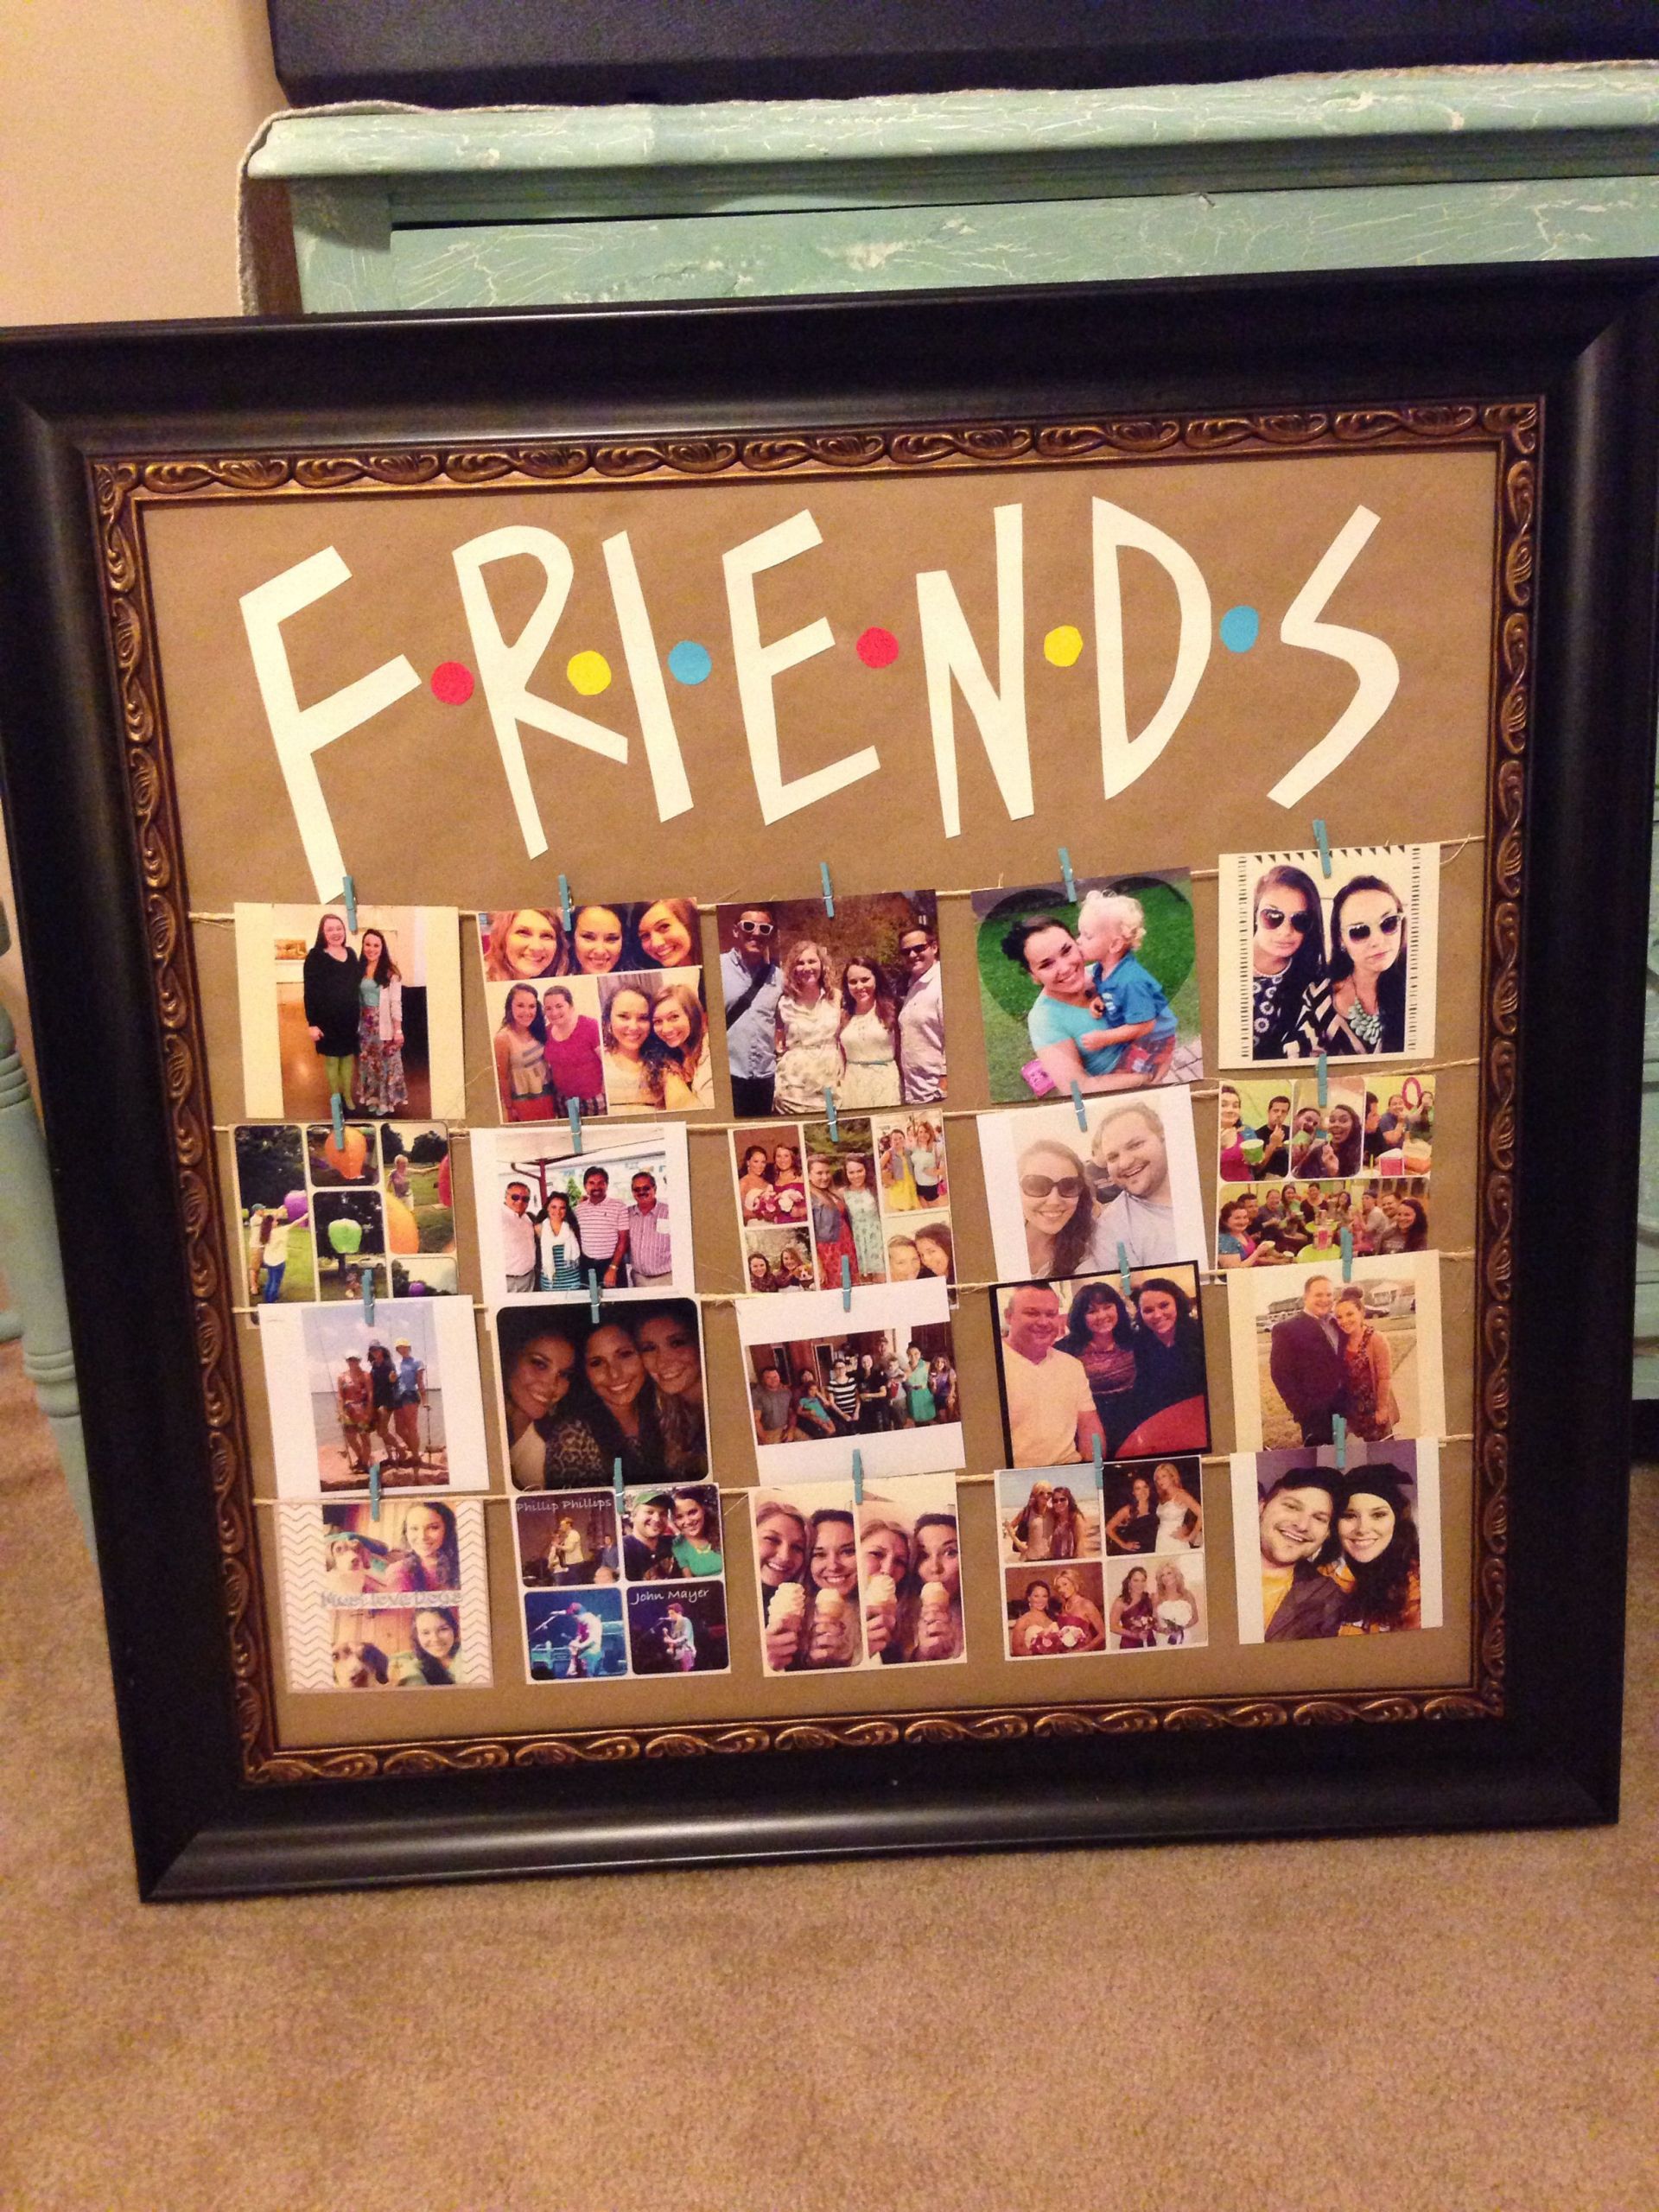 DIY Friend Birthday Gifts
 Friends tv show picture frame diy party ideas